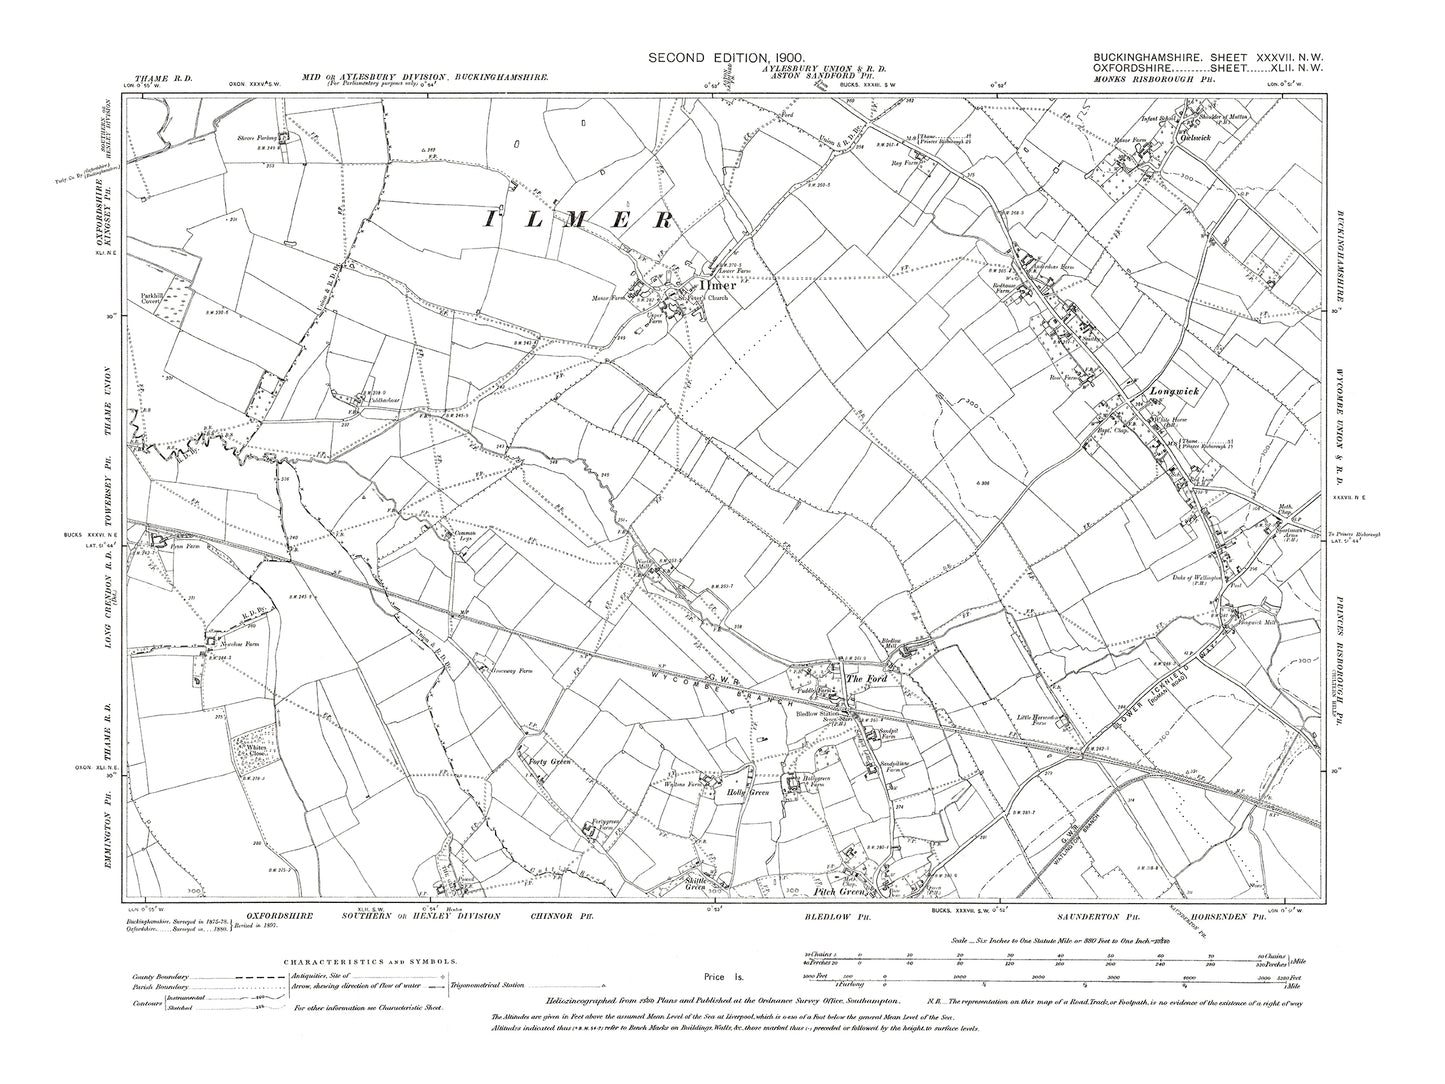 Old OS map dated 1900, showing Ilmer, Bledlow (north), Longwick in Buckinghamshire 37NW